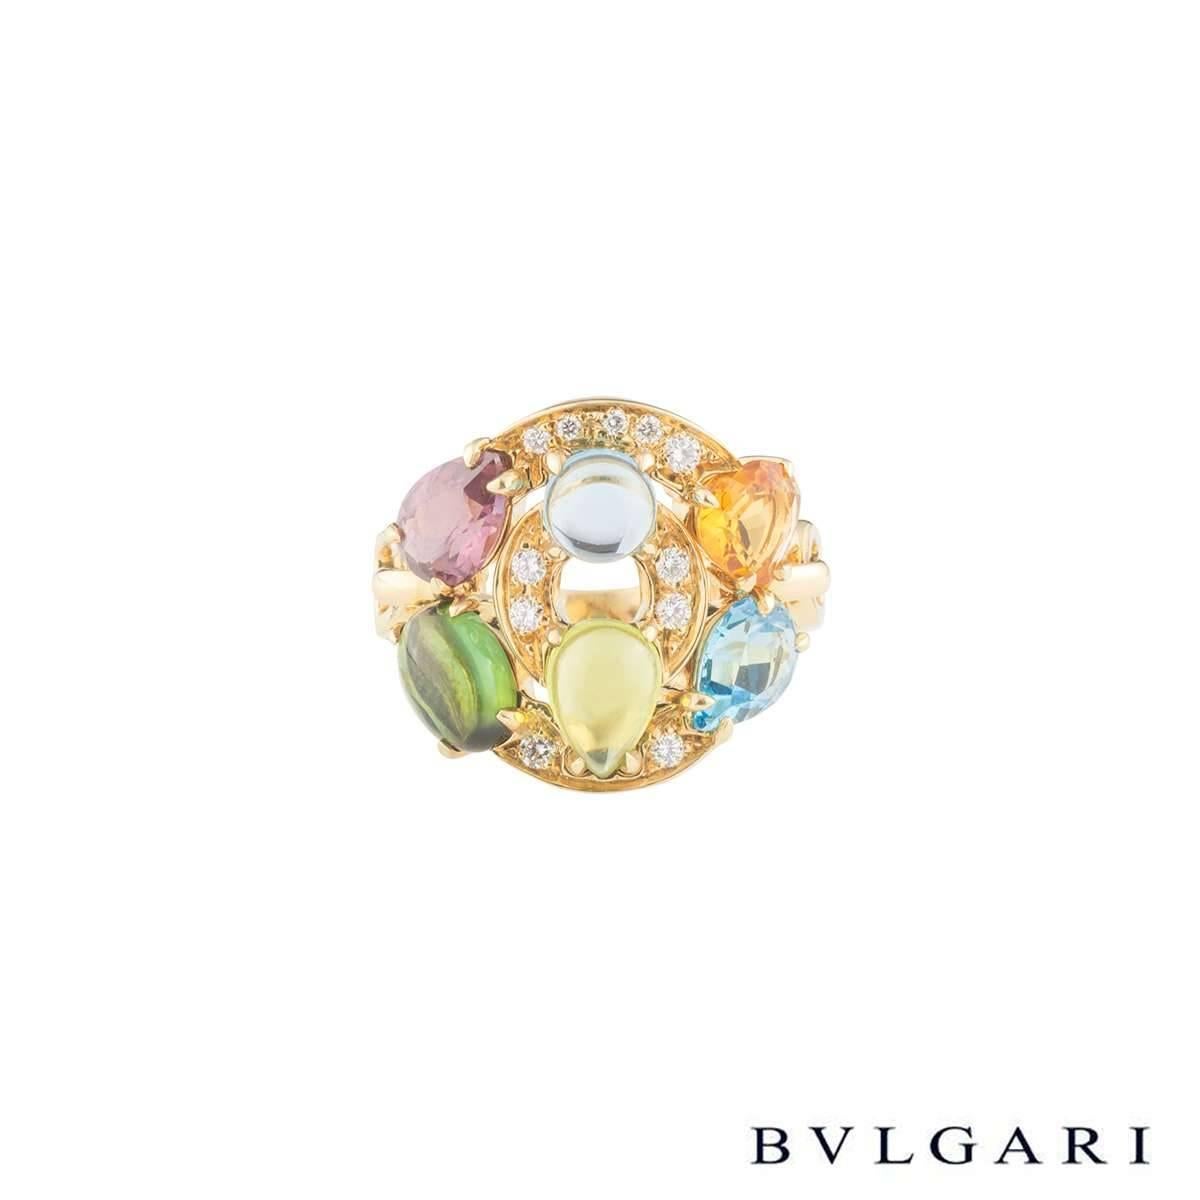 An 18k yellow gold Bvlgari multi-gemstone ring from the Astrale collection. The ring is composed of 2 graduating circular pave set diamond and multi-stone discs. The discs are composed of a variety of faceted and cabochon gemstones, including blue